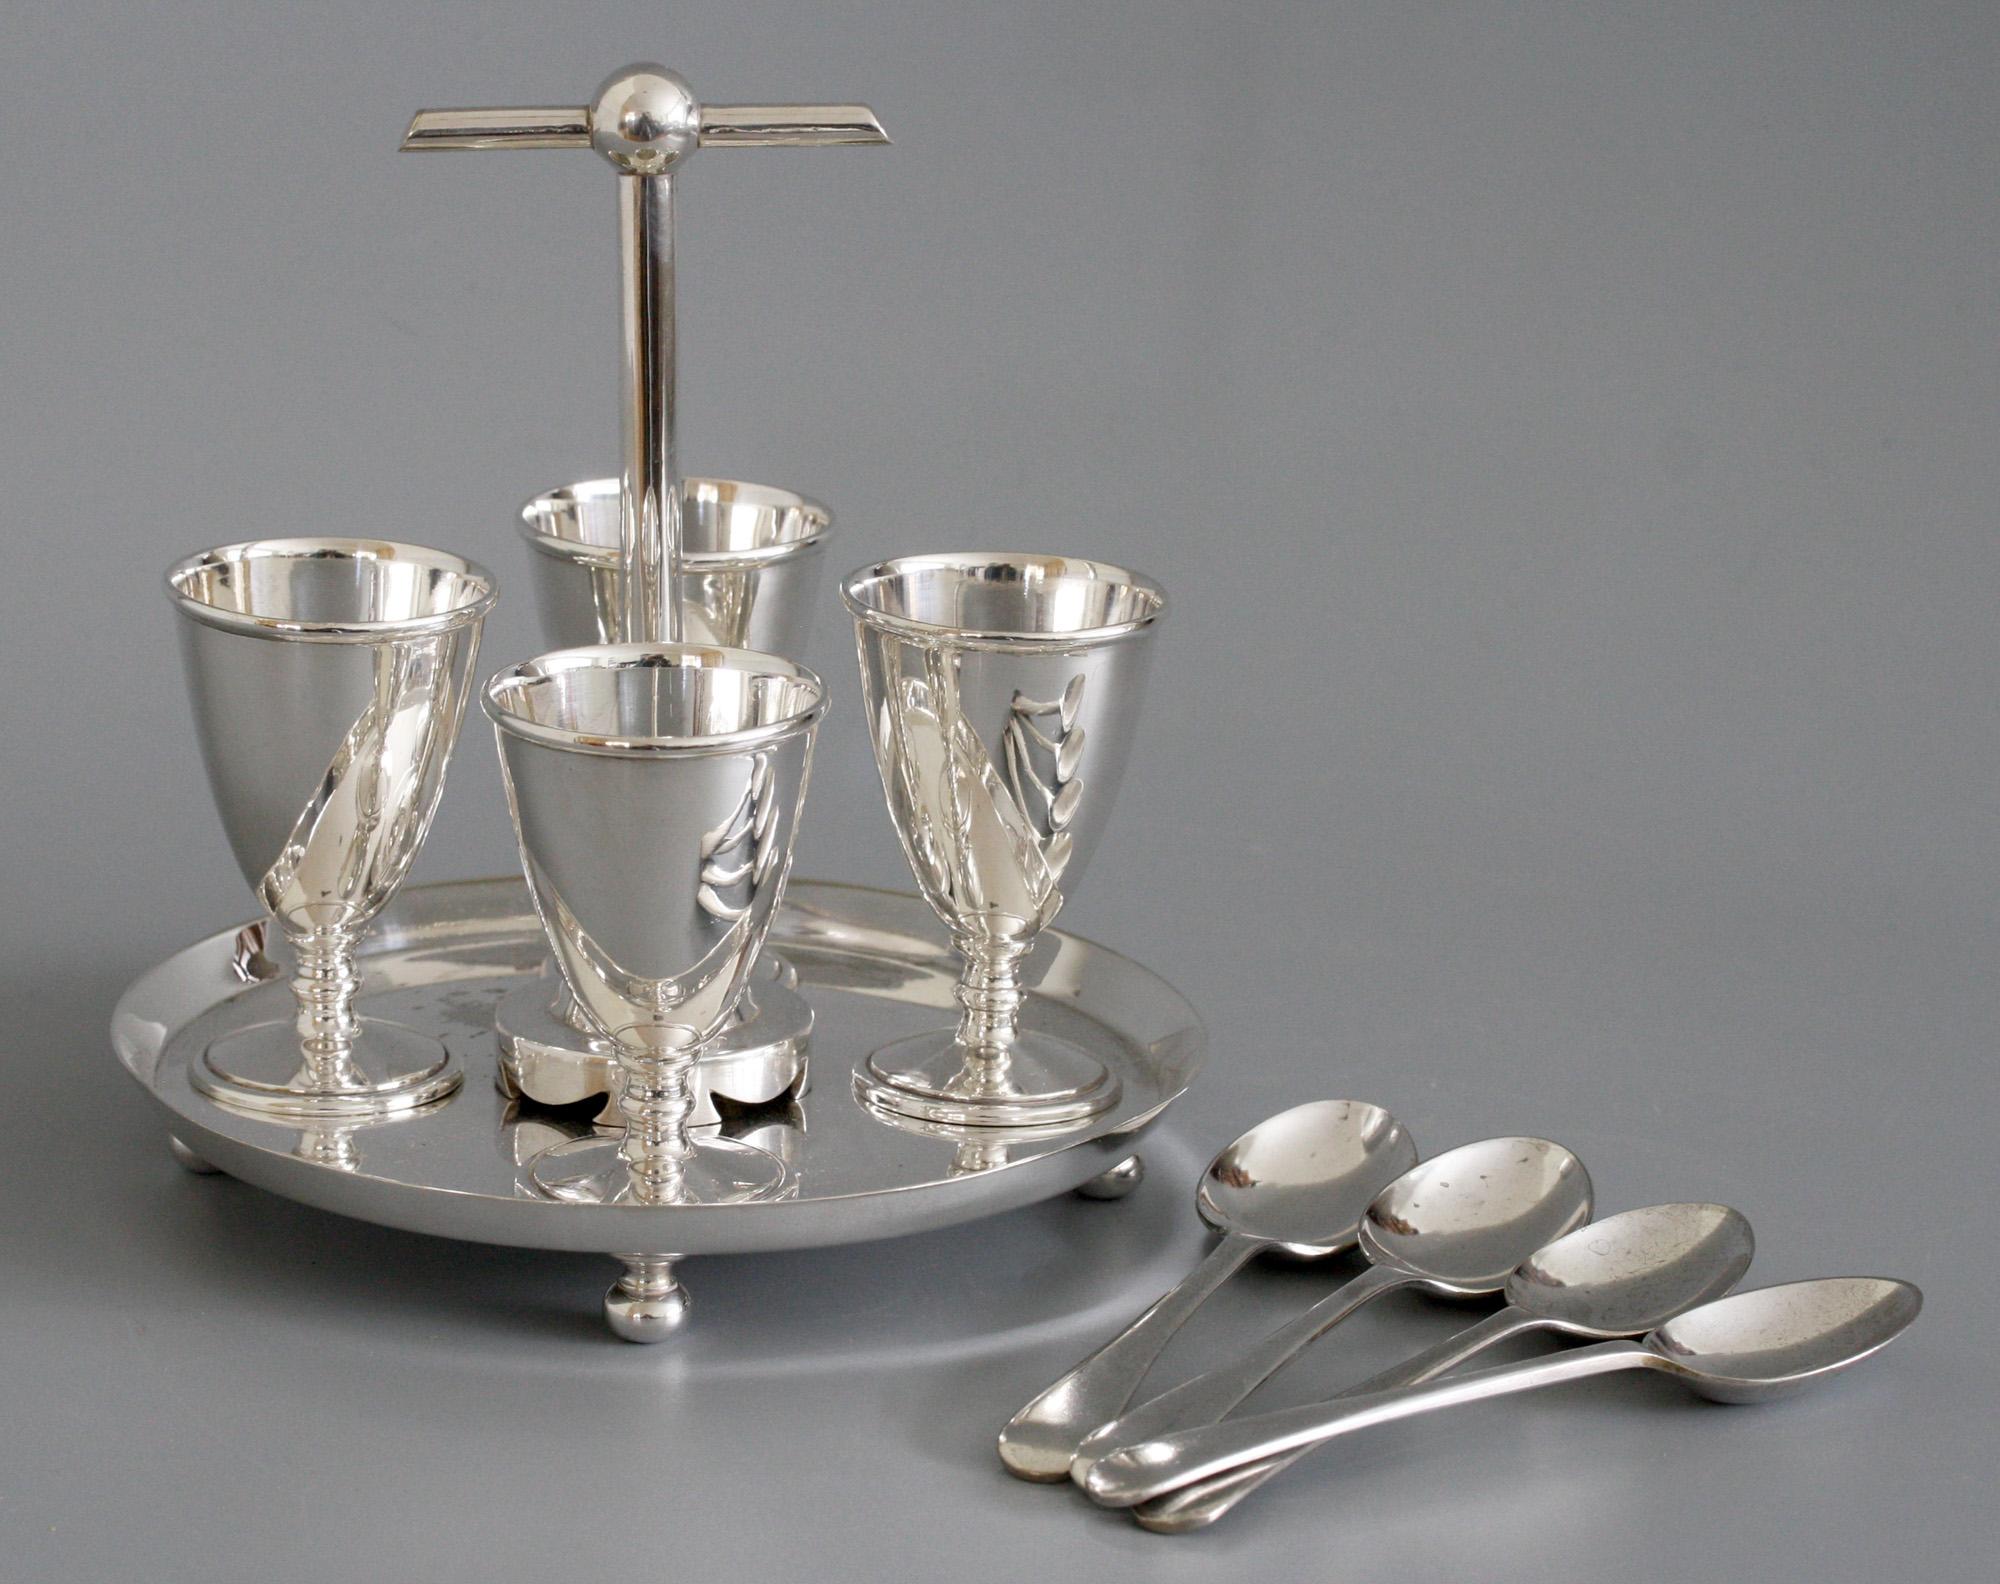 Hukin & Heath Silver Plated Four Eggcup Stand Designed by Christopher Dresser 9